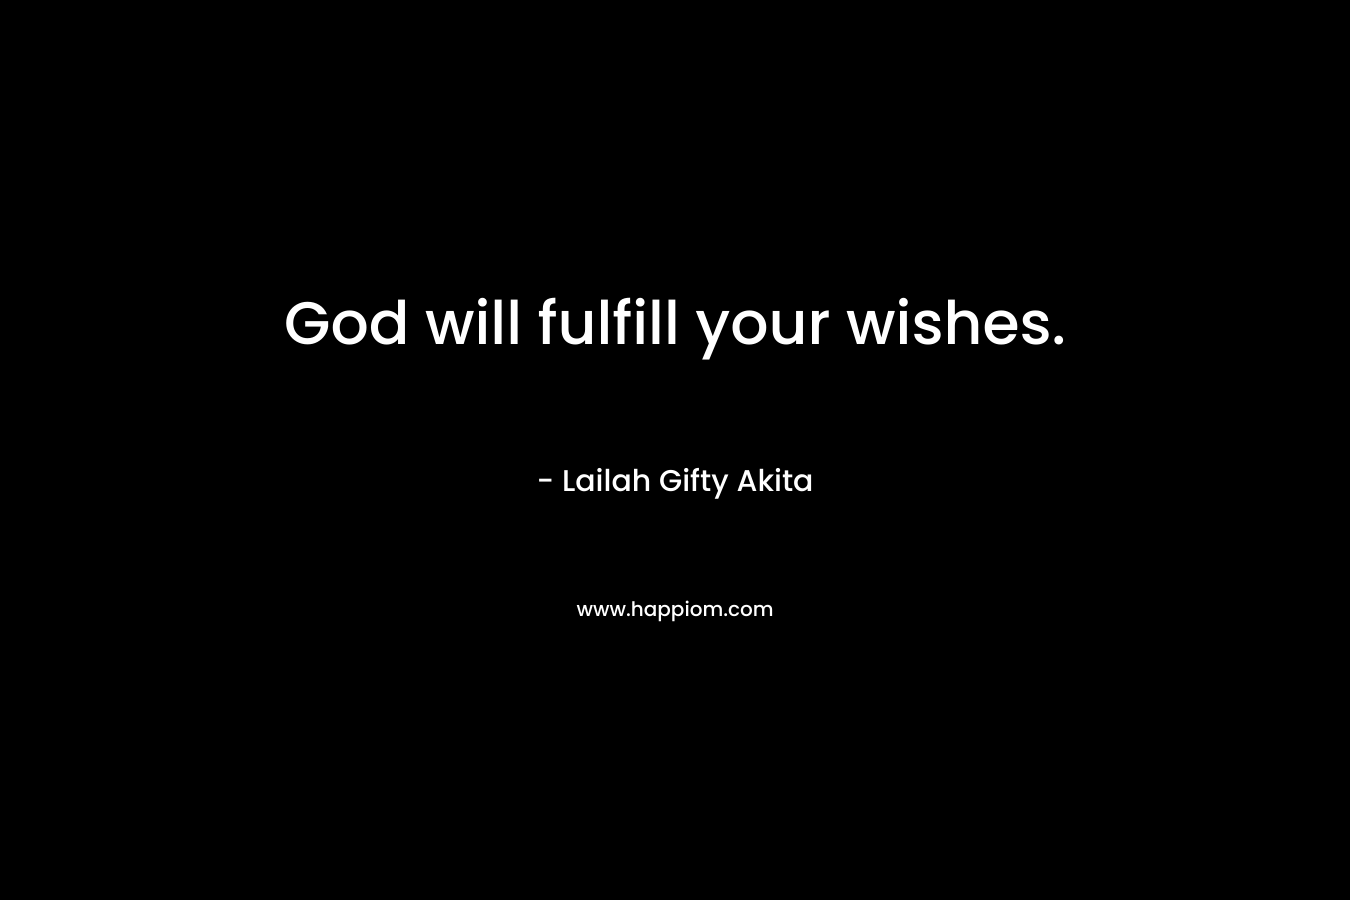 God will fulfill your wishes.